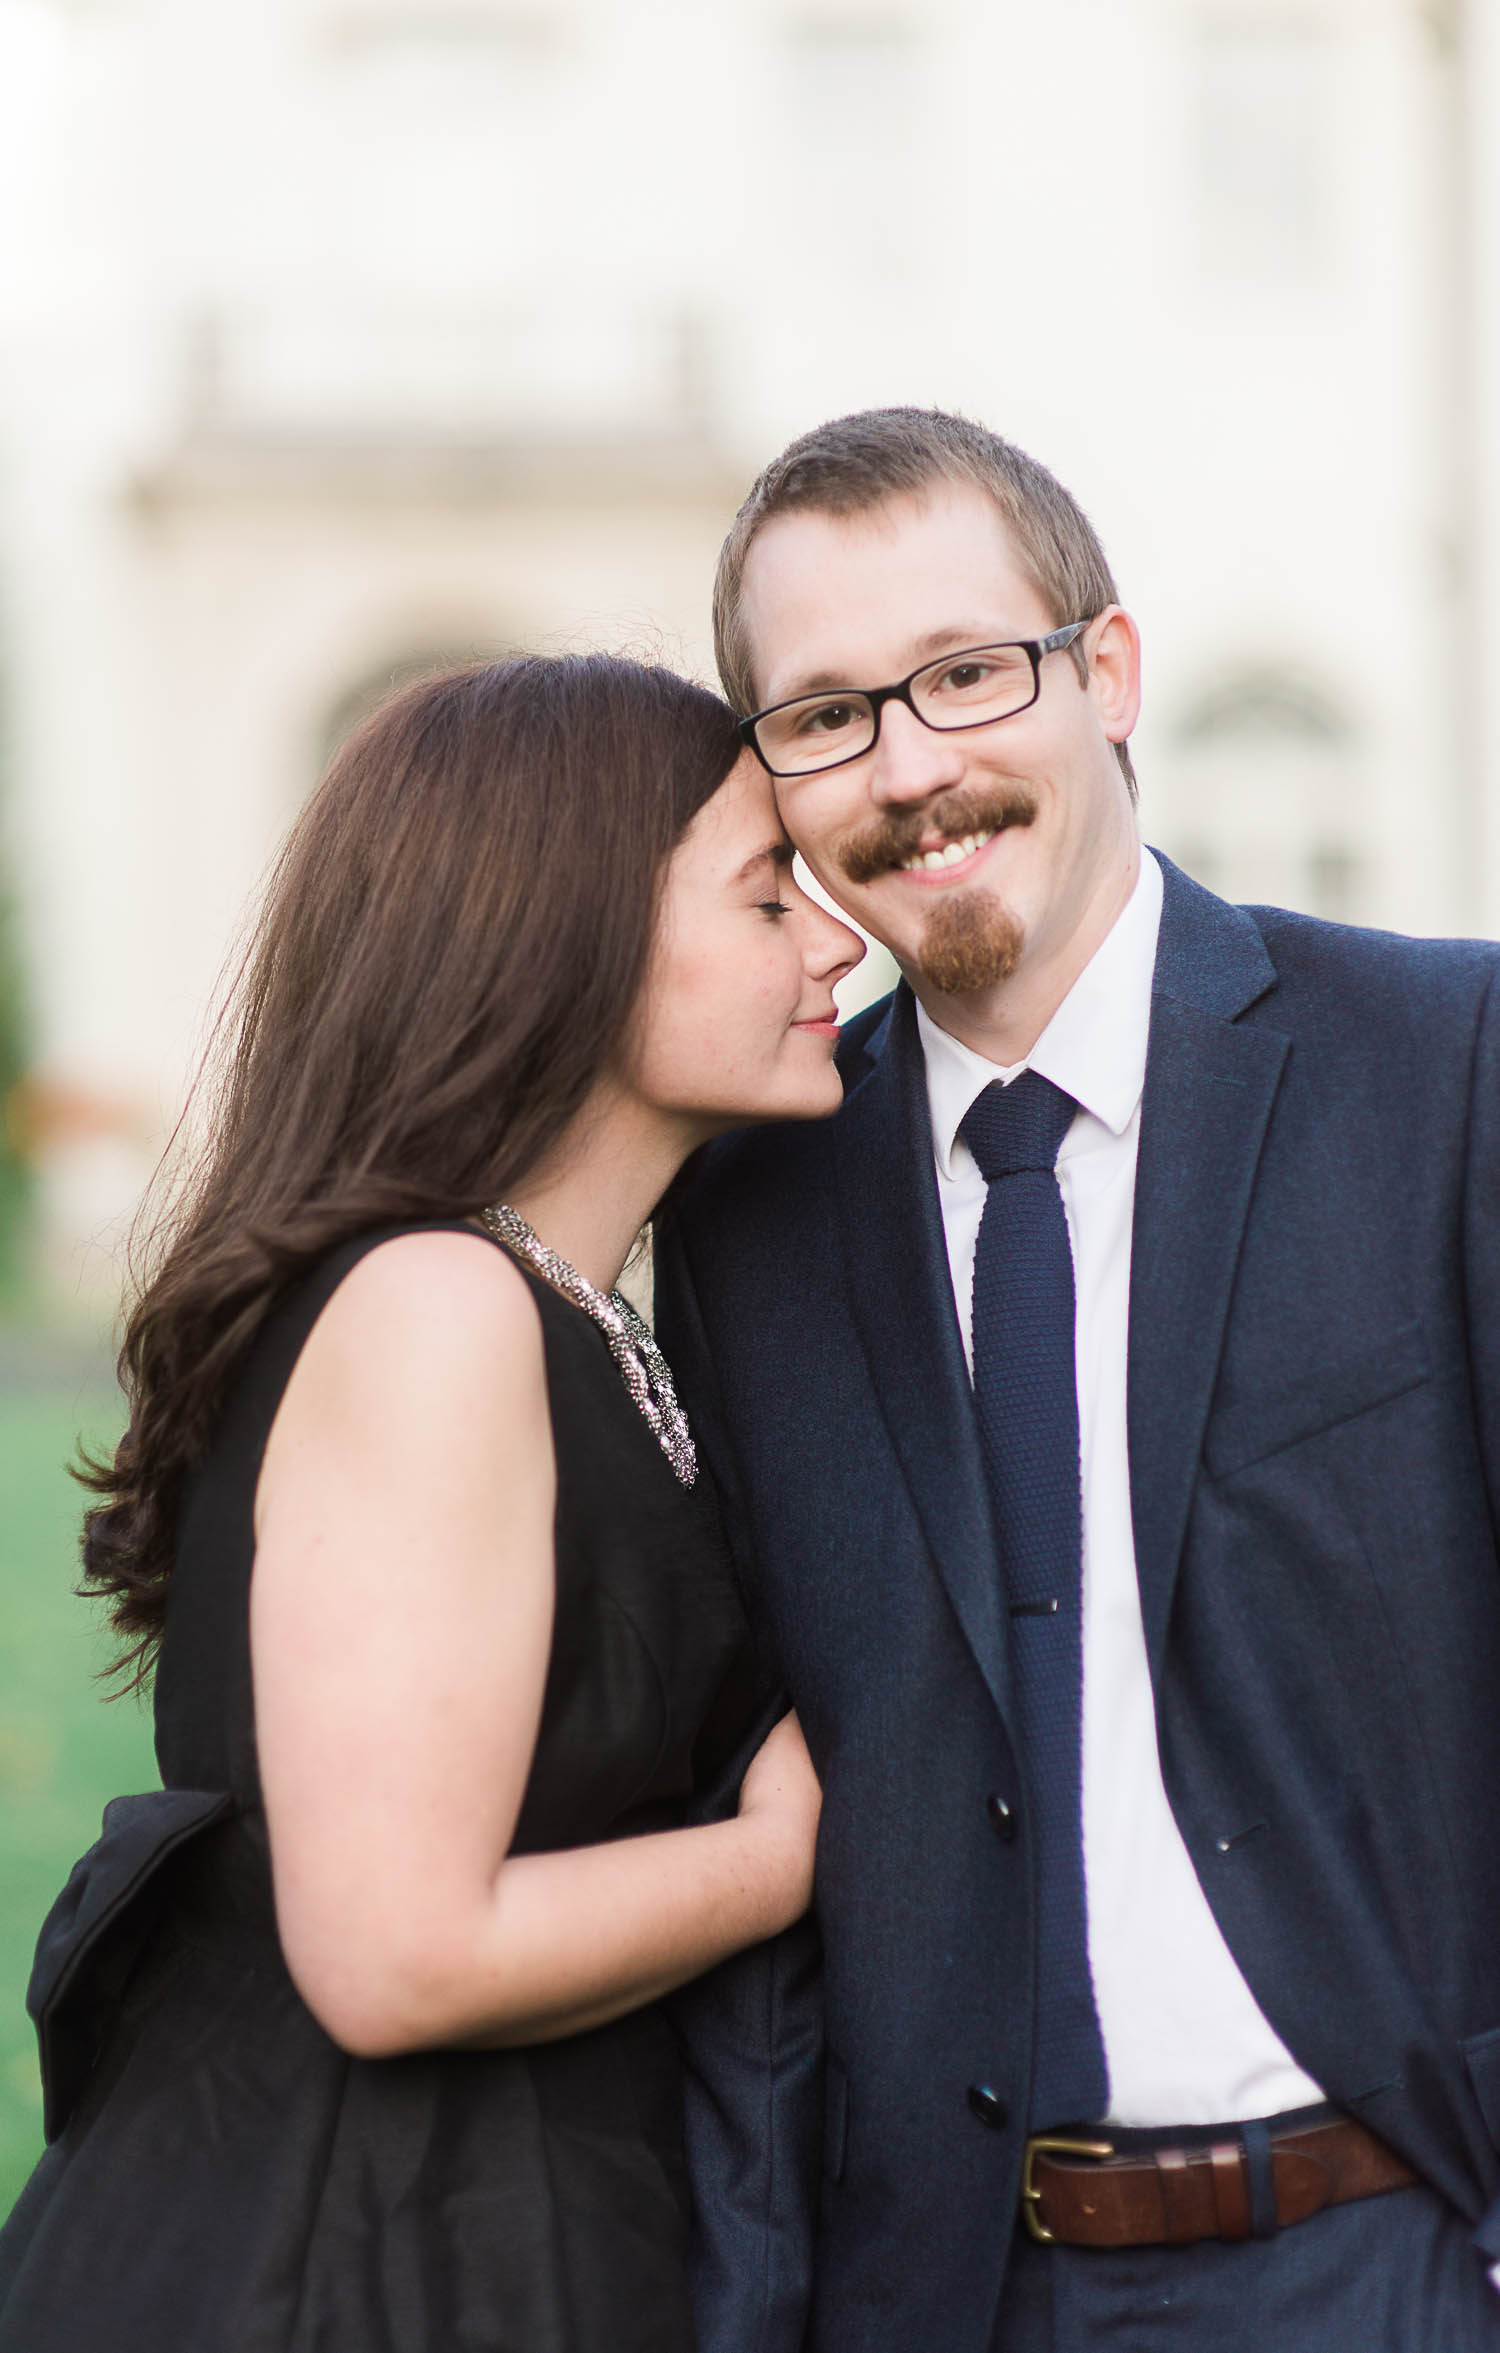 Indianapolis Museum of Art Engagement Session, Ashley Link Photography